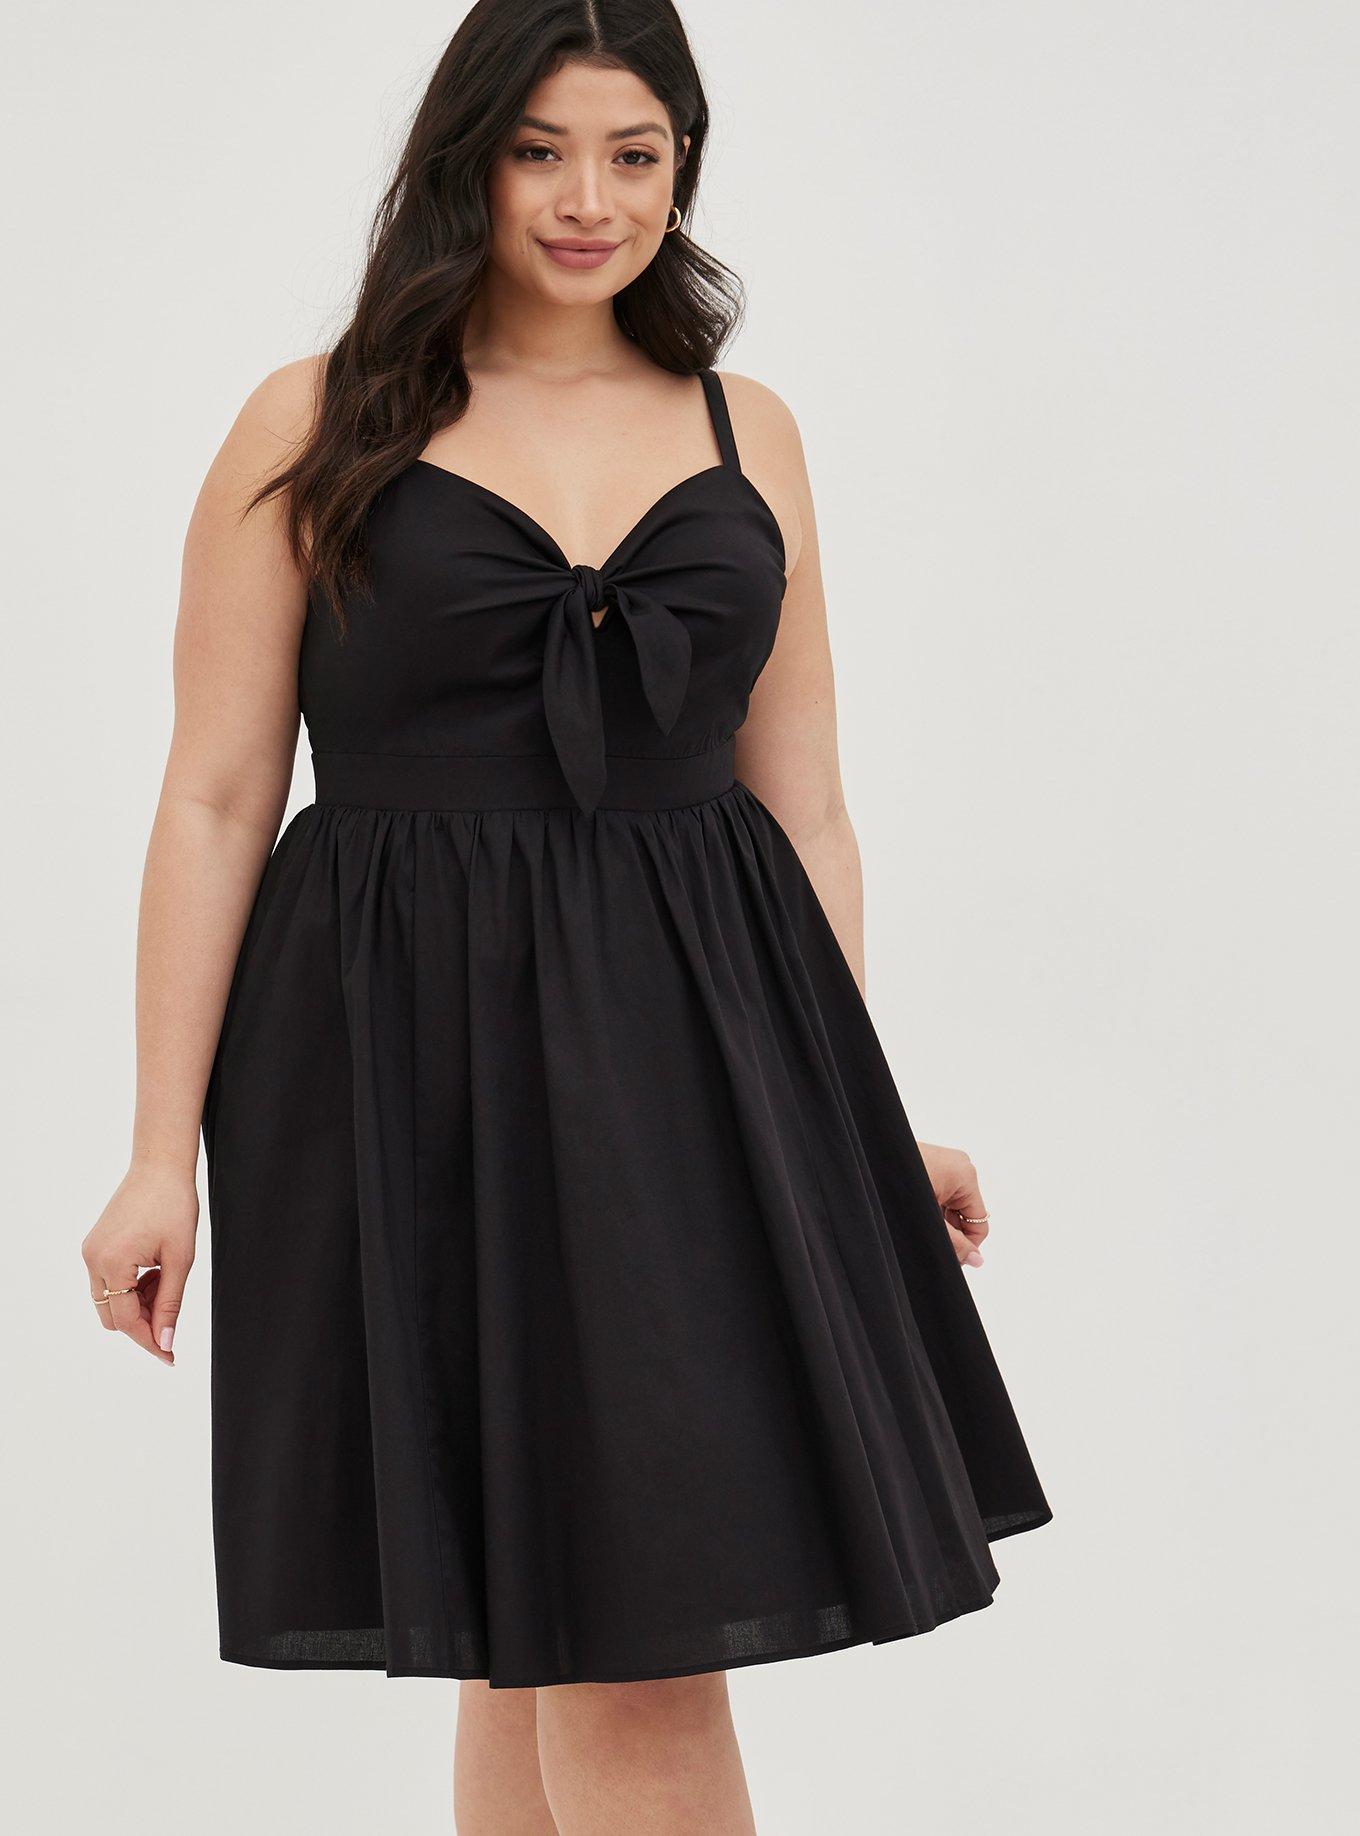 Torrid Mini Gauze Lace-Up Skater Dress Size 3X - $41 - From Candice